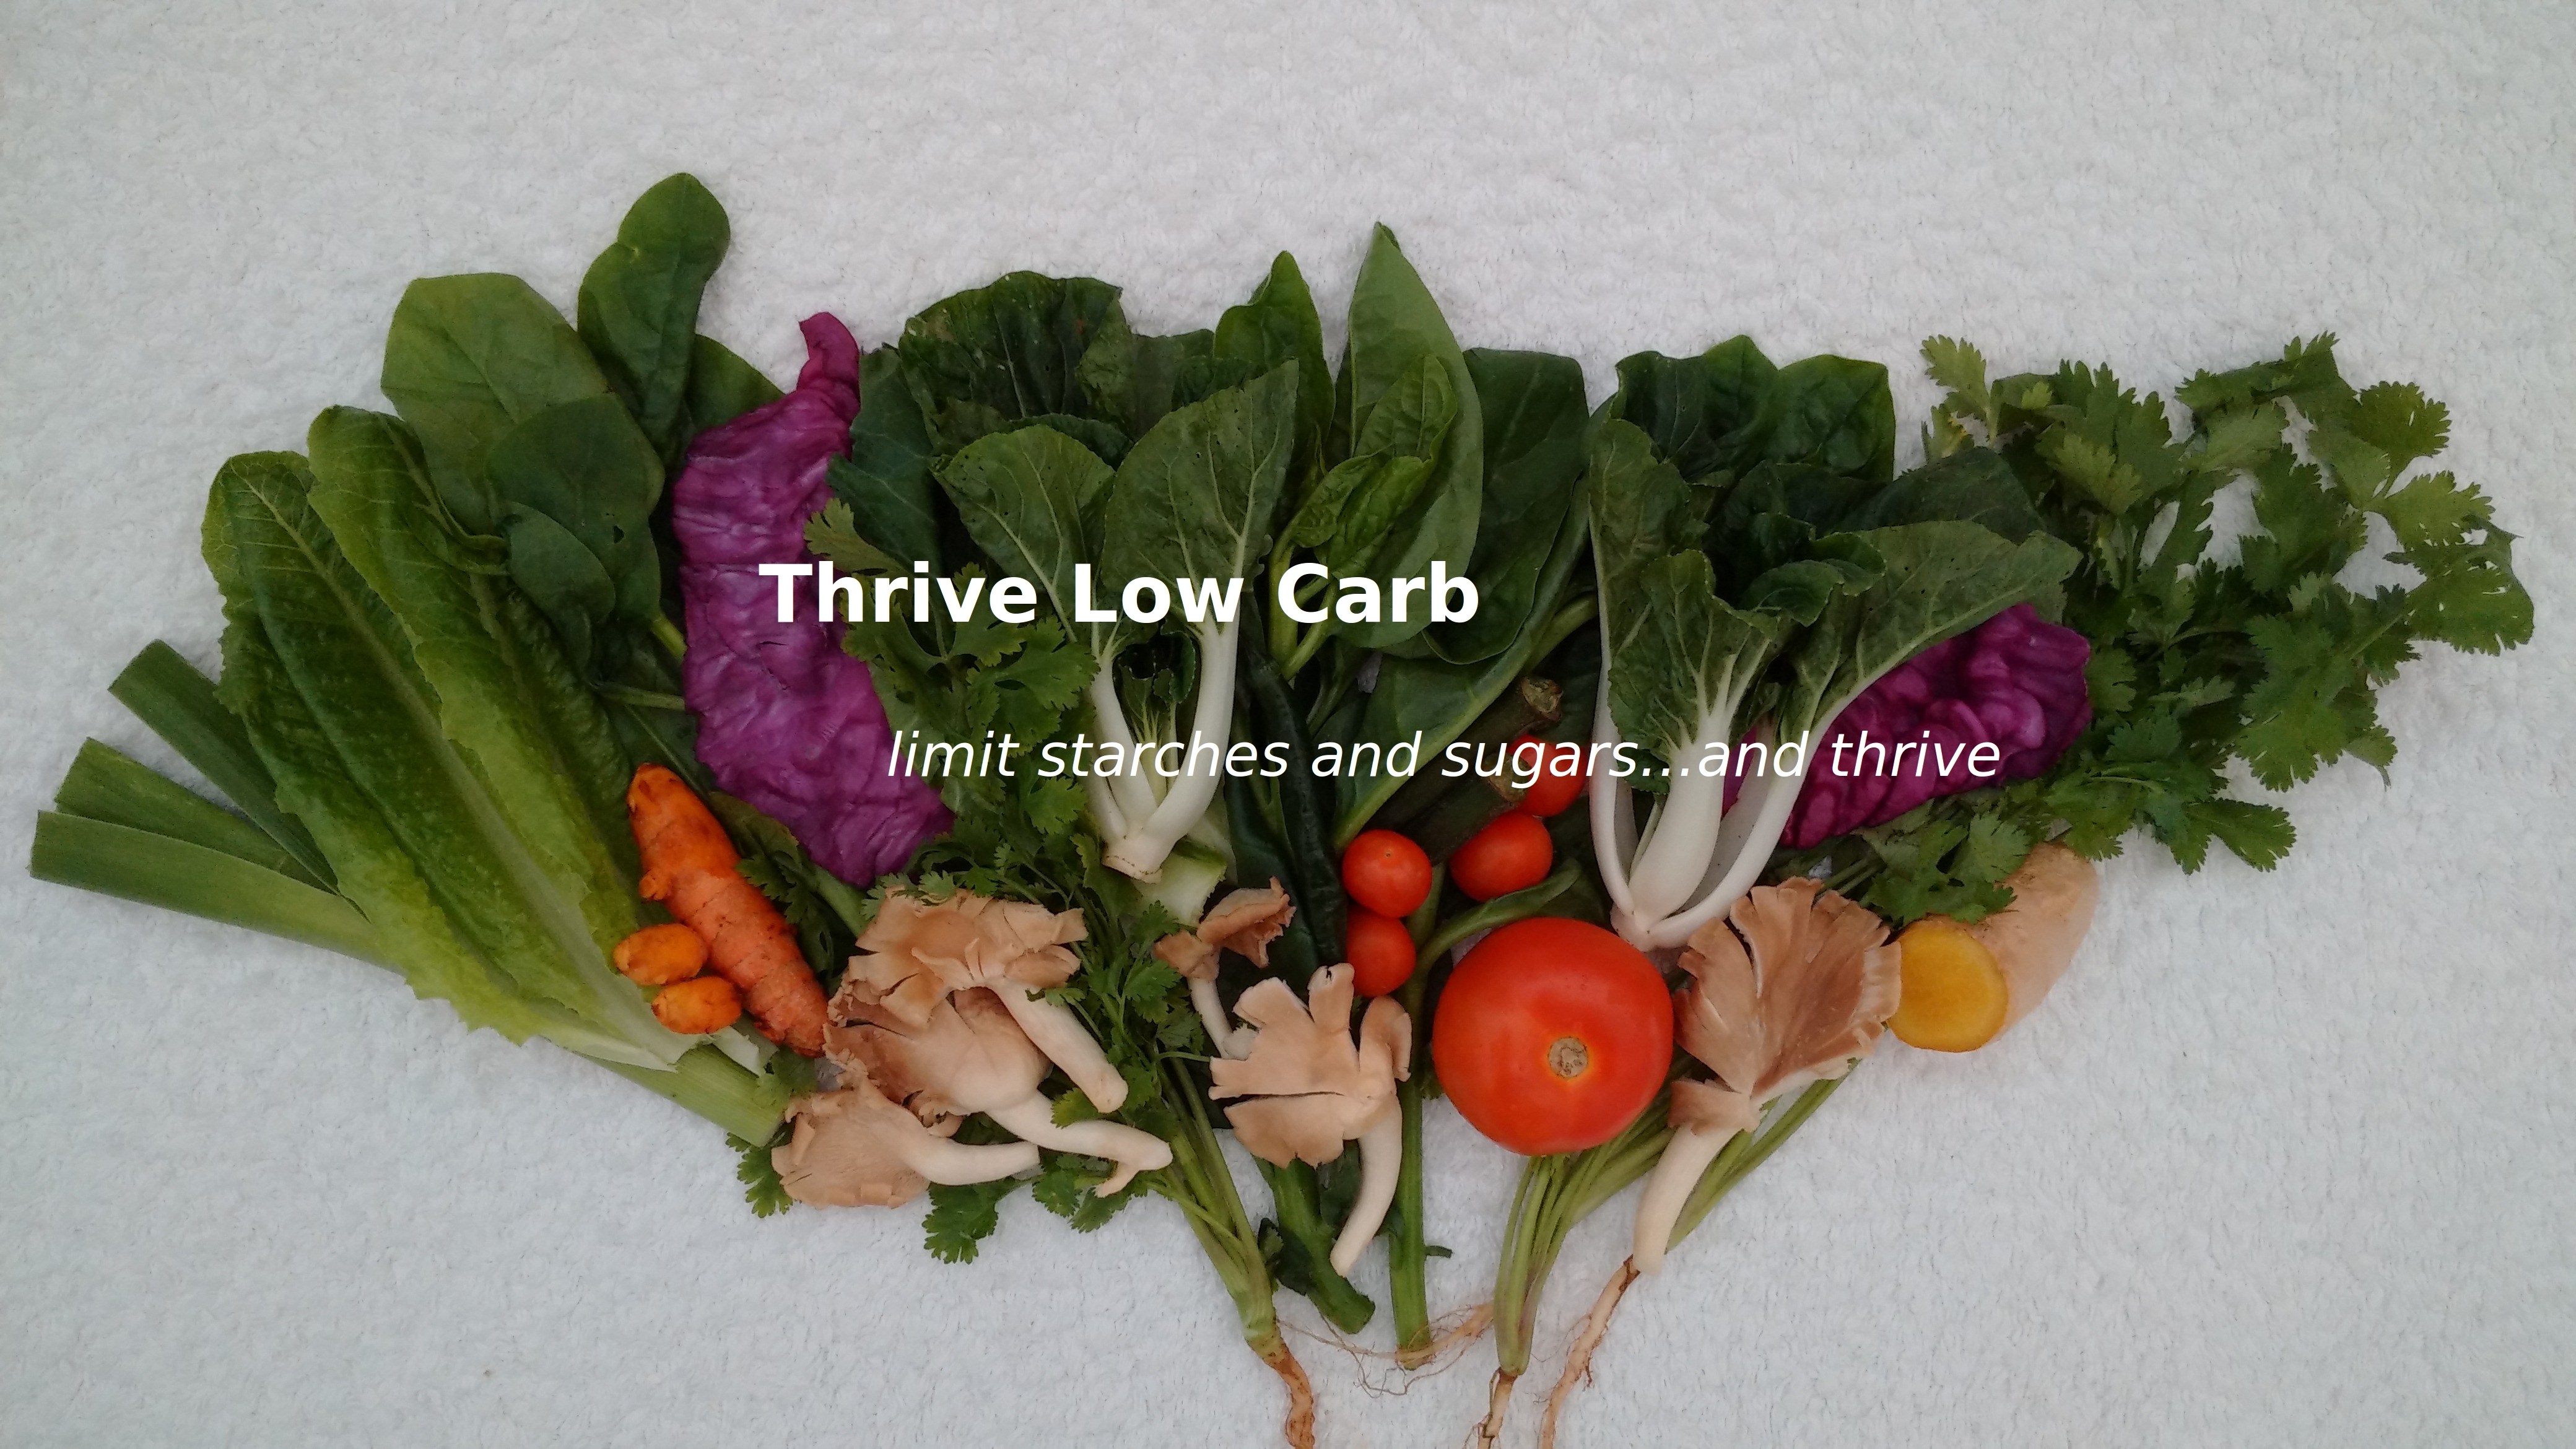 ThriveLowCarb.com. Limit starches and sugars...and thrive